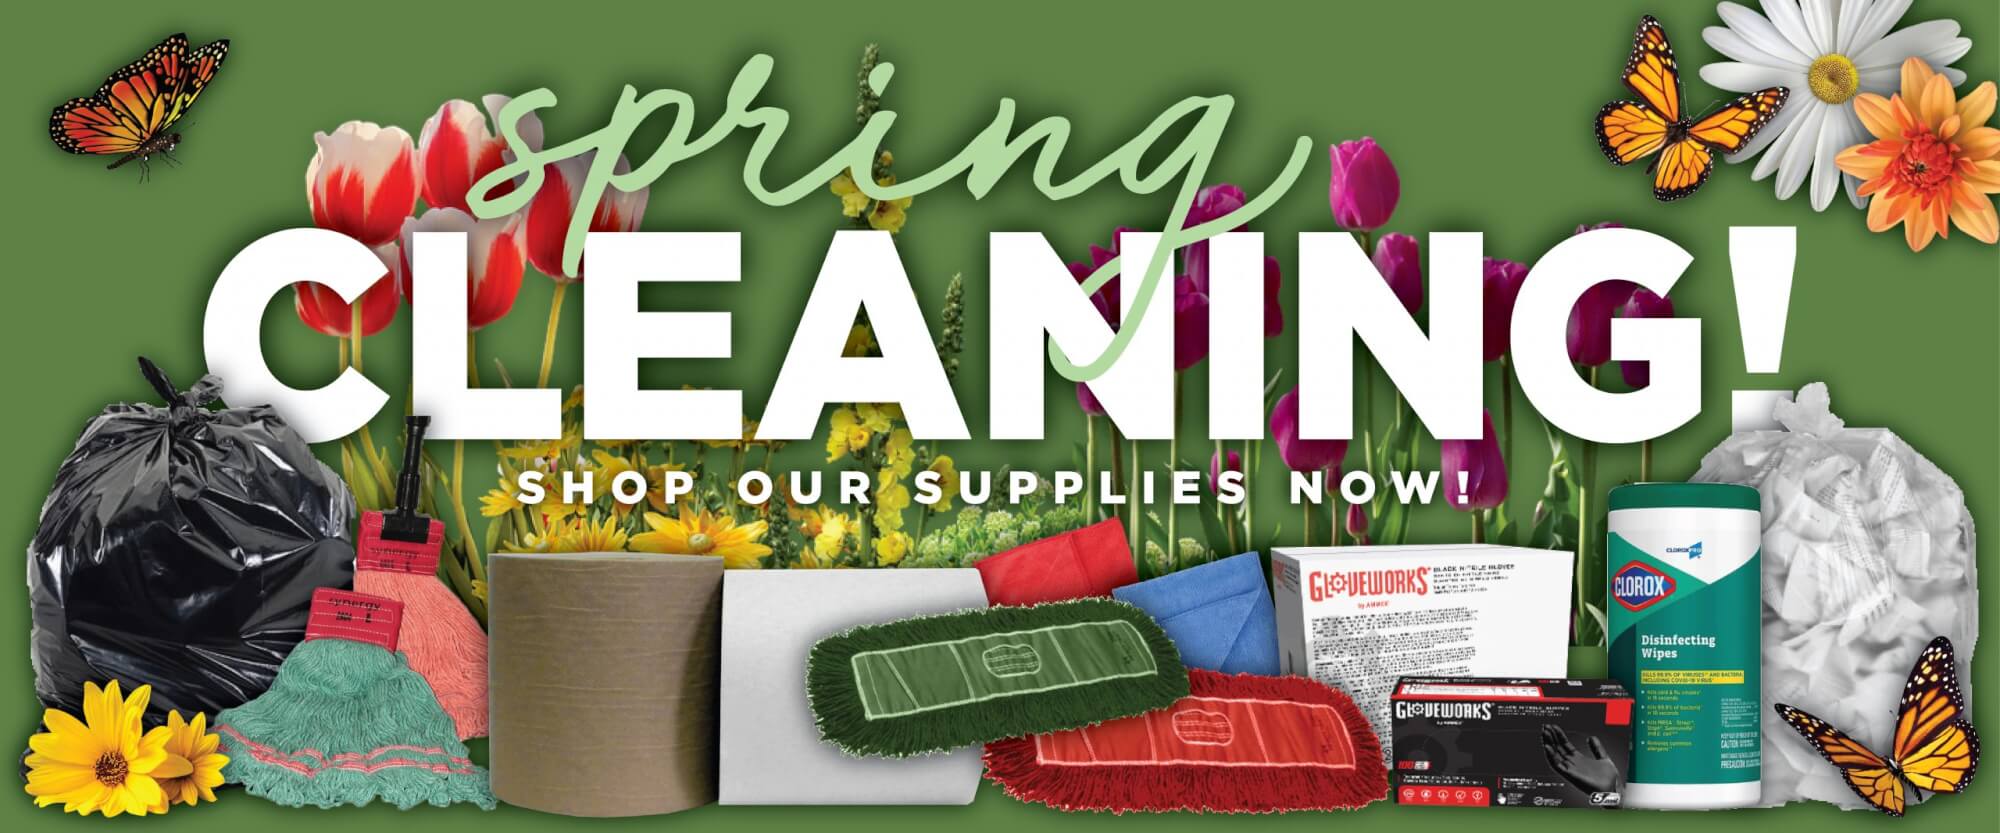 spring cleaning banner-01